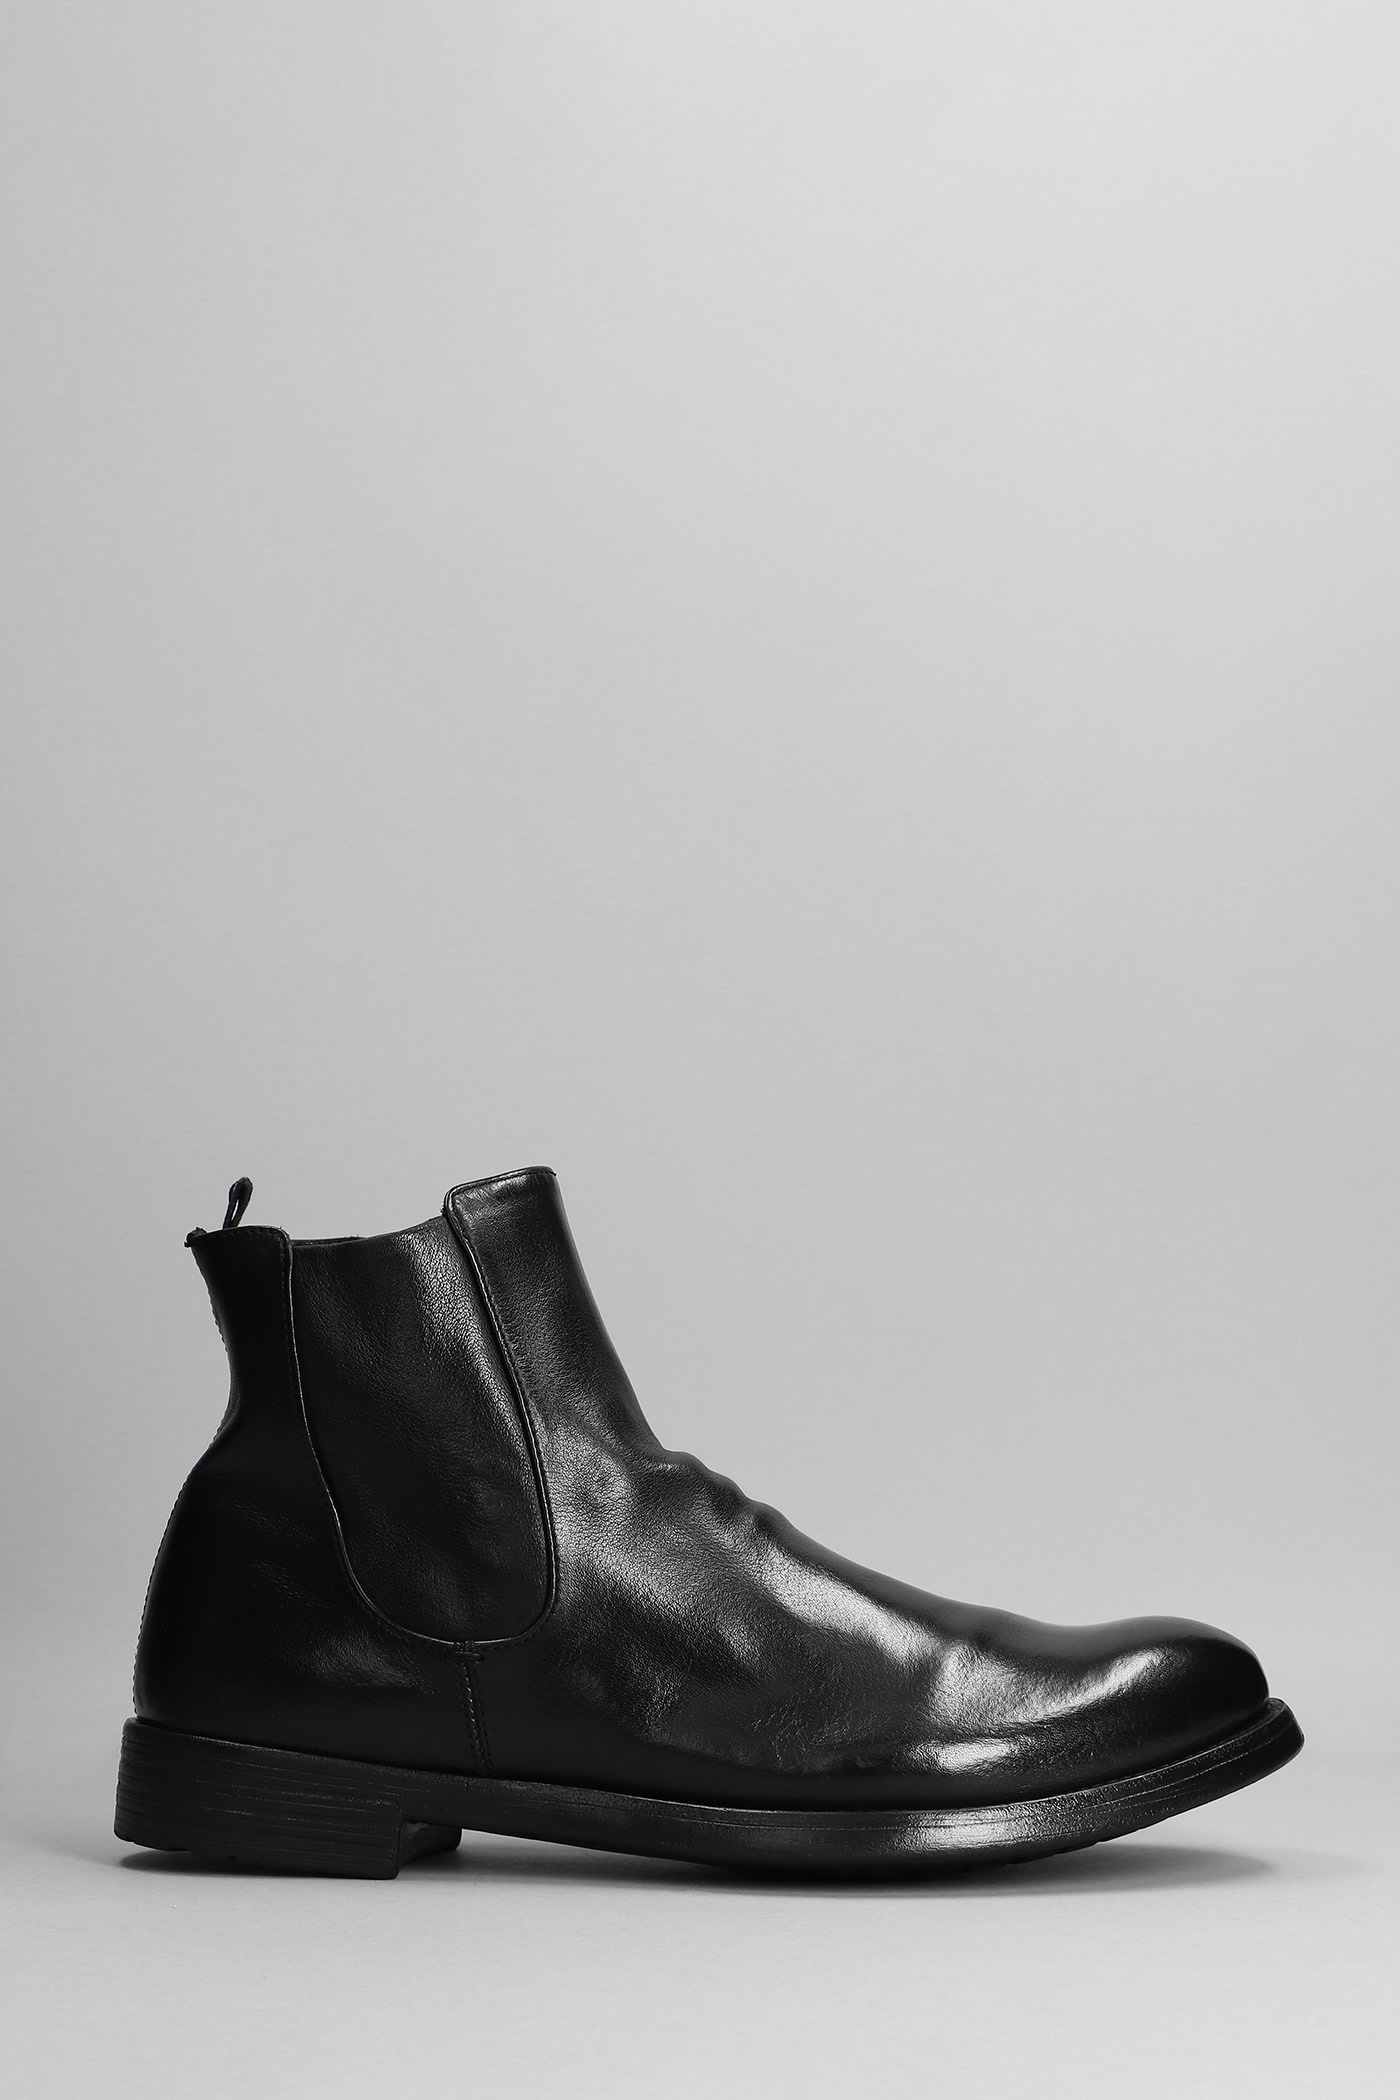 Officine Creative Hive 036 Ankle Boots In Black Leather